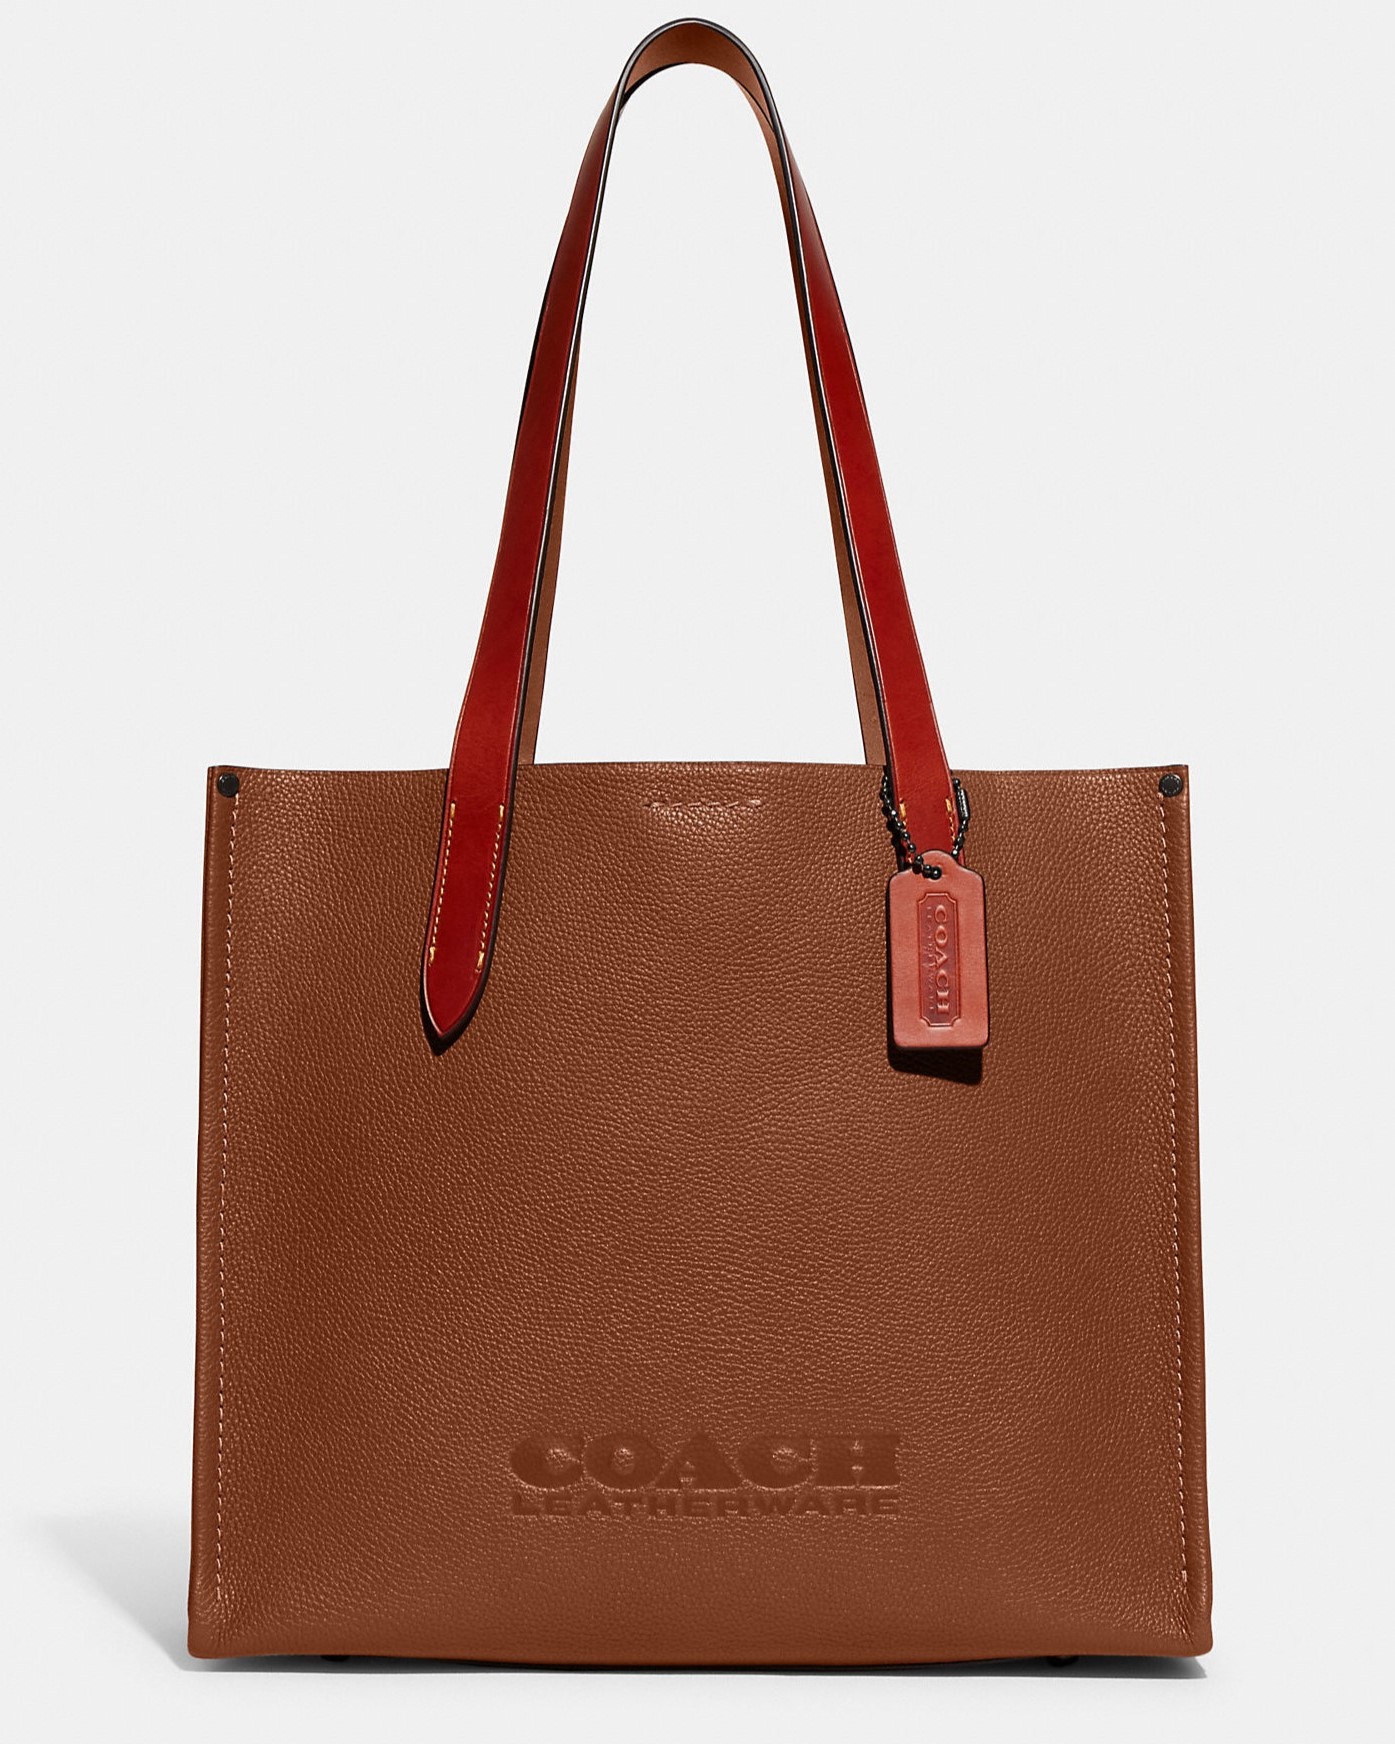 TÚI NỮ TOTE COACH RELAY TOTE 34 POLISHED PEBBLE LEATHER BAG CH757 6